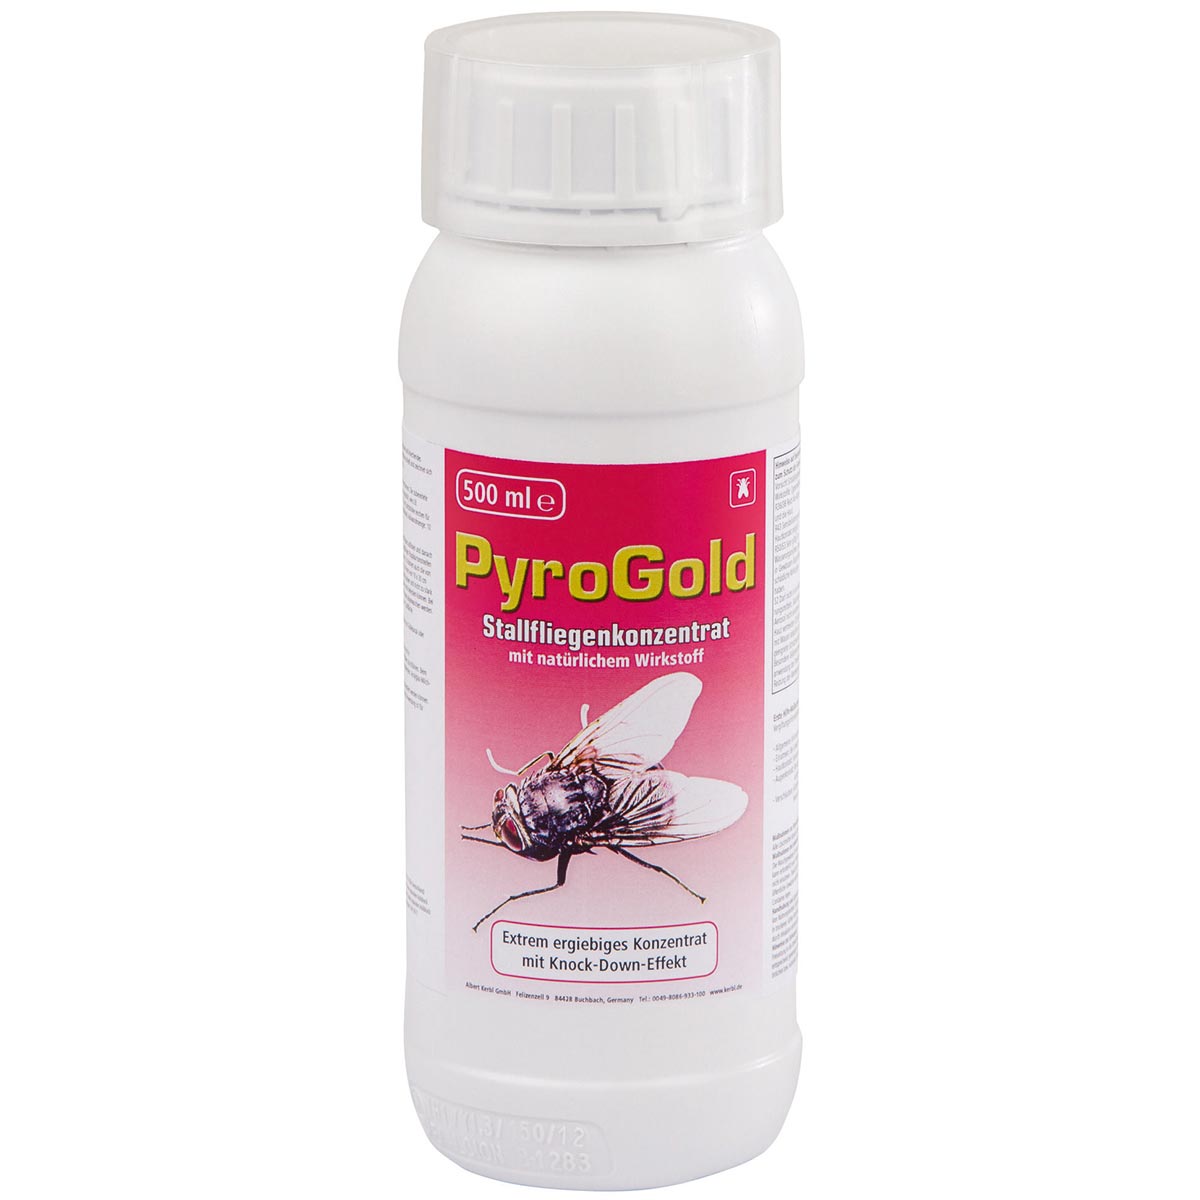 Stable Fly Concentrate PyroGold